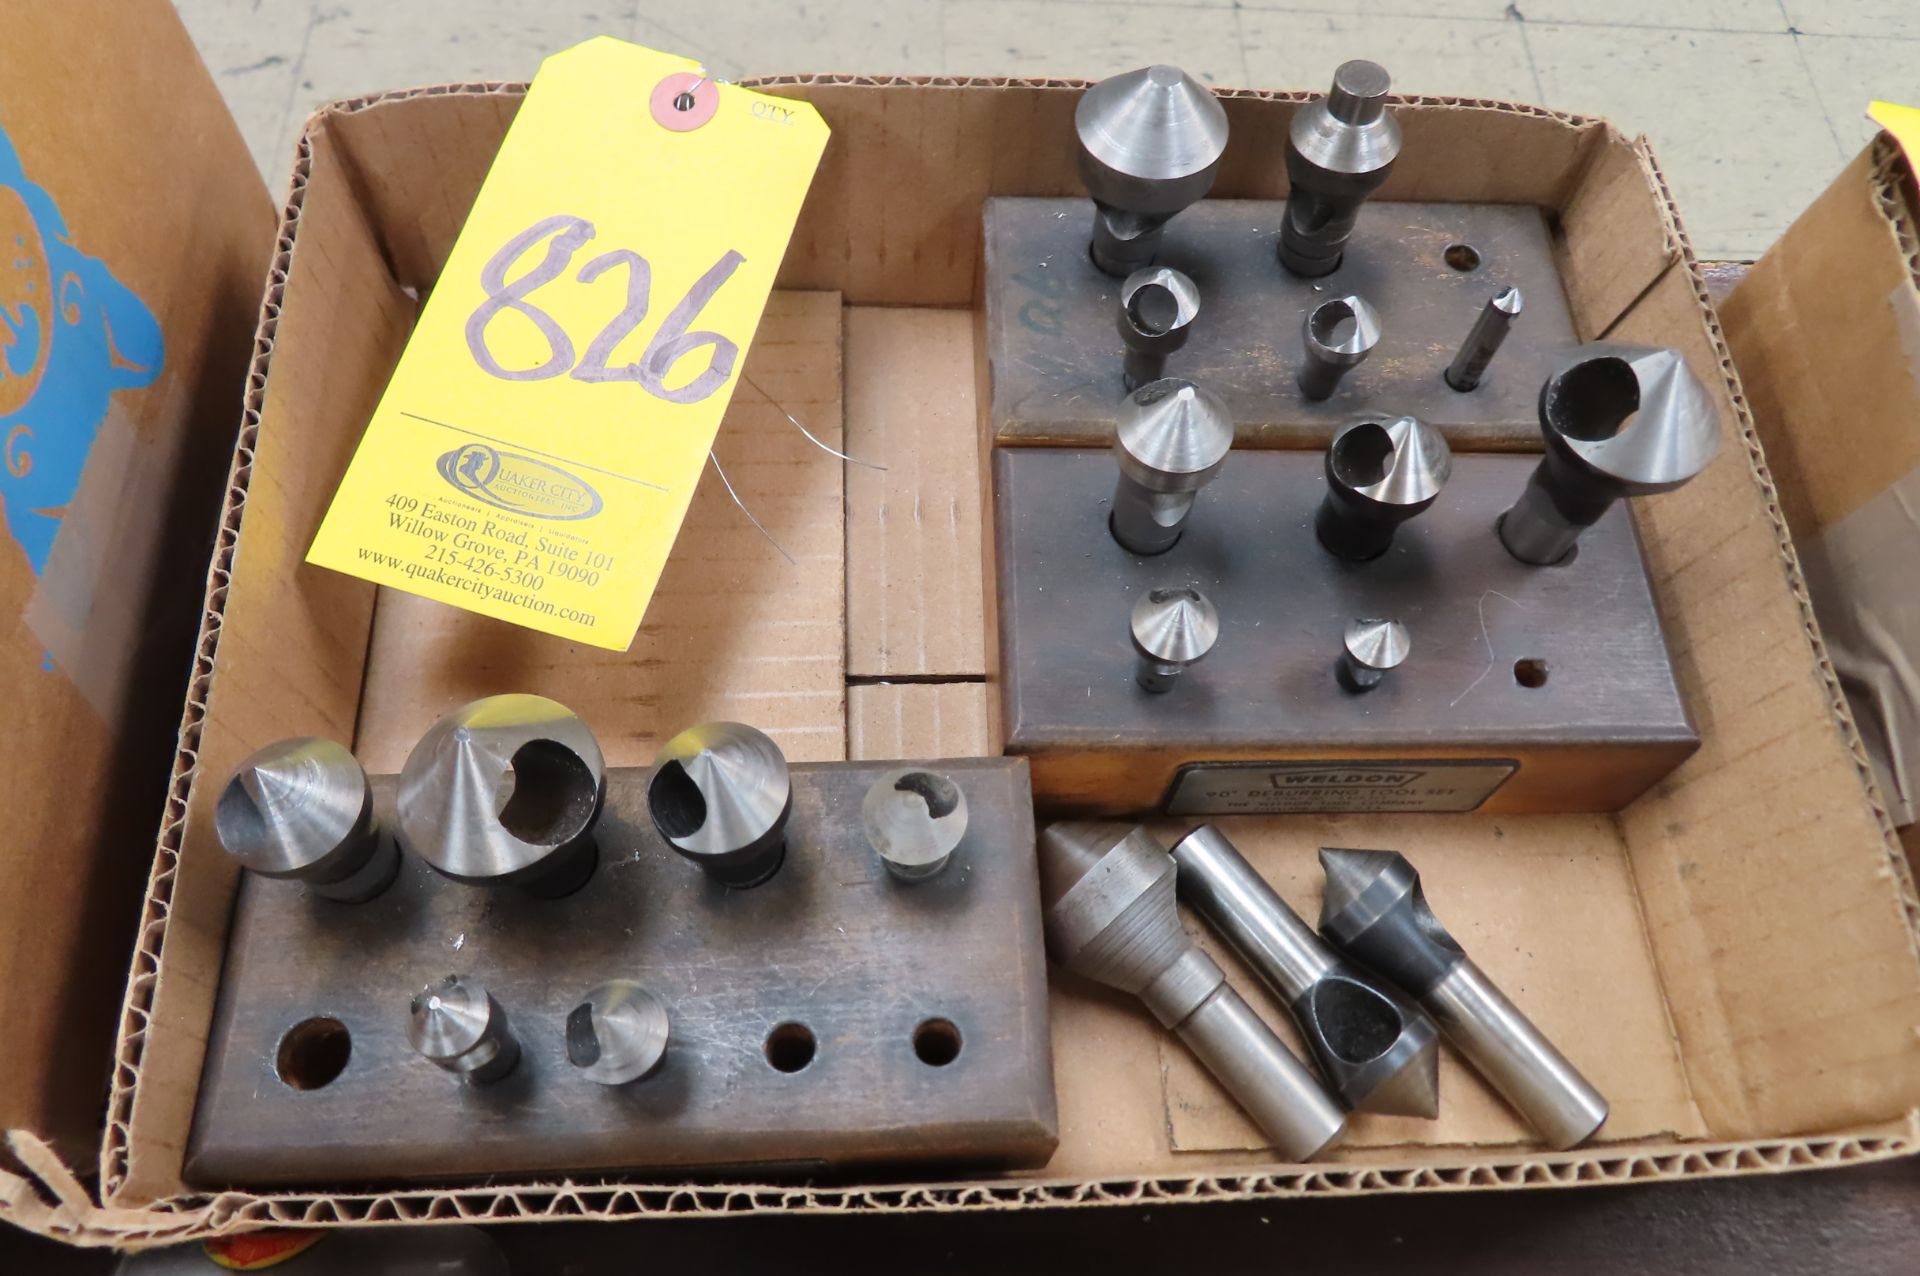 WELDON COUNTERSINKS AND DEBURRING TOOL SETS